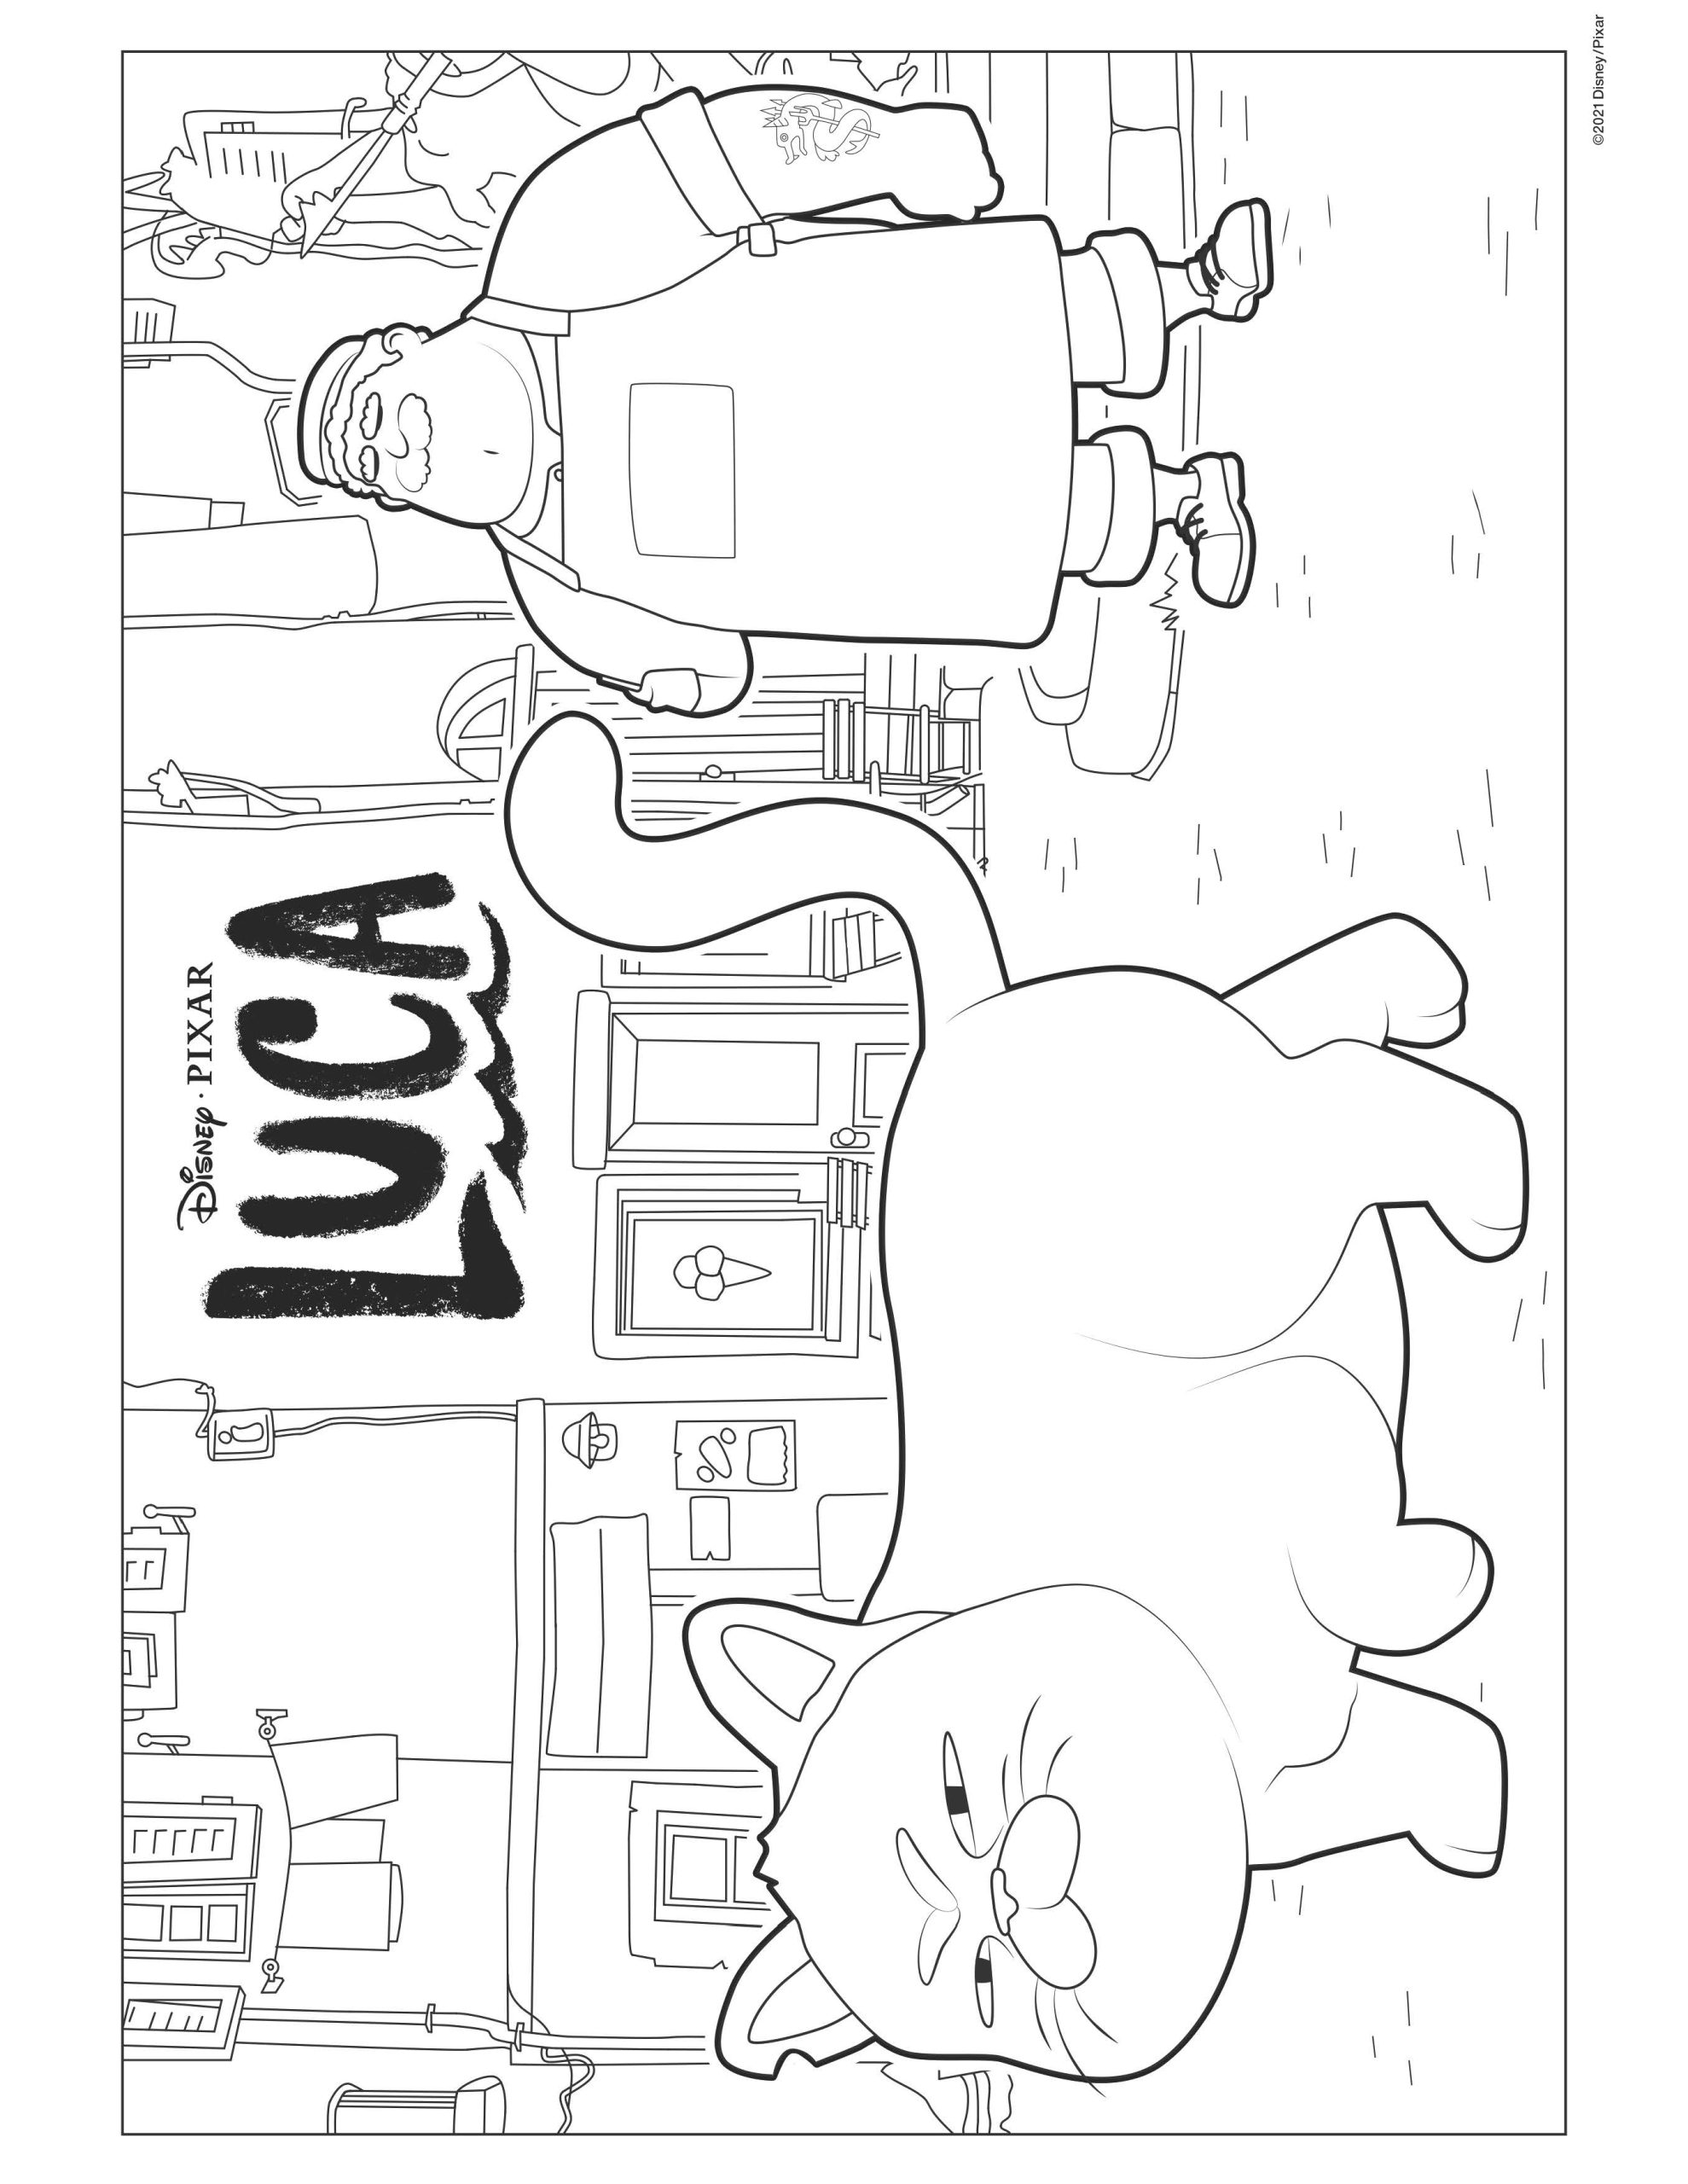 Free Printable Luca Coloring Pages and Activities